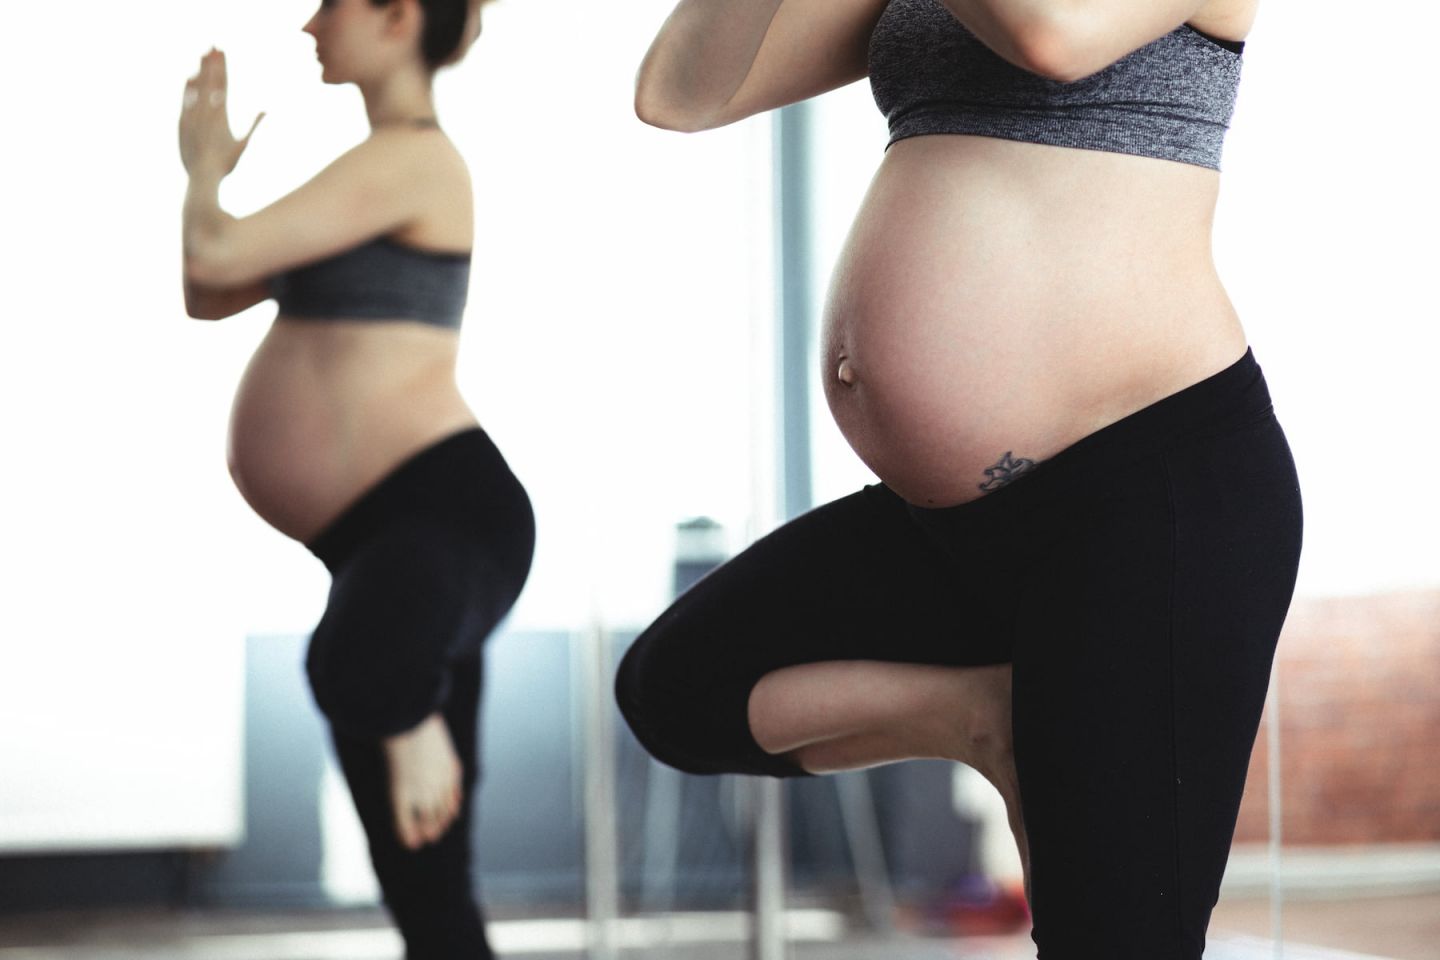 Best Personal trainer for women in London at home or at work and exercises  after pregnancy